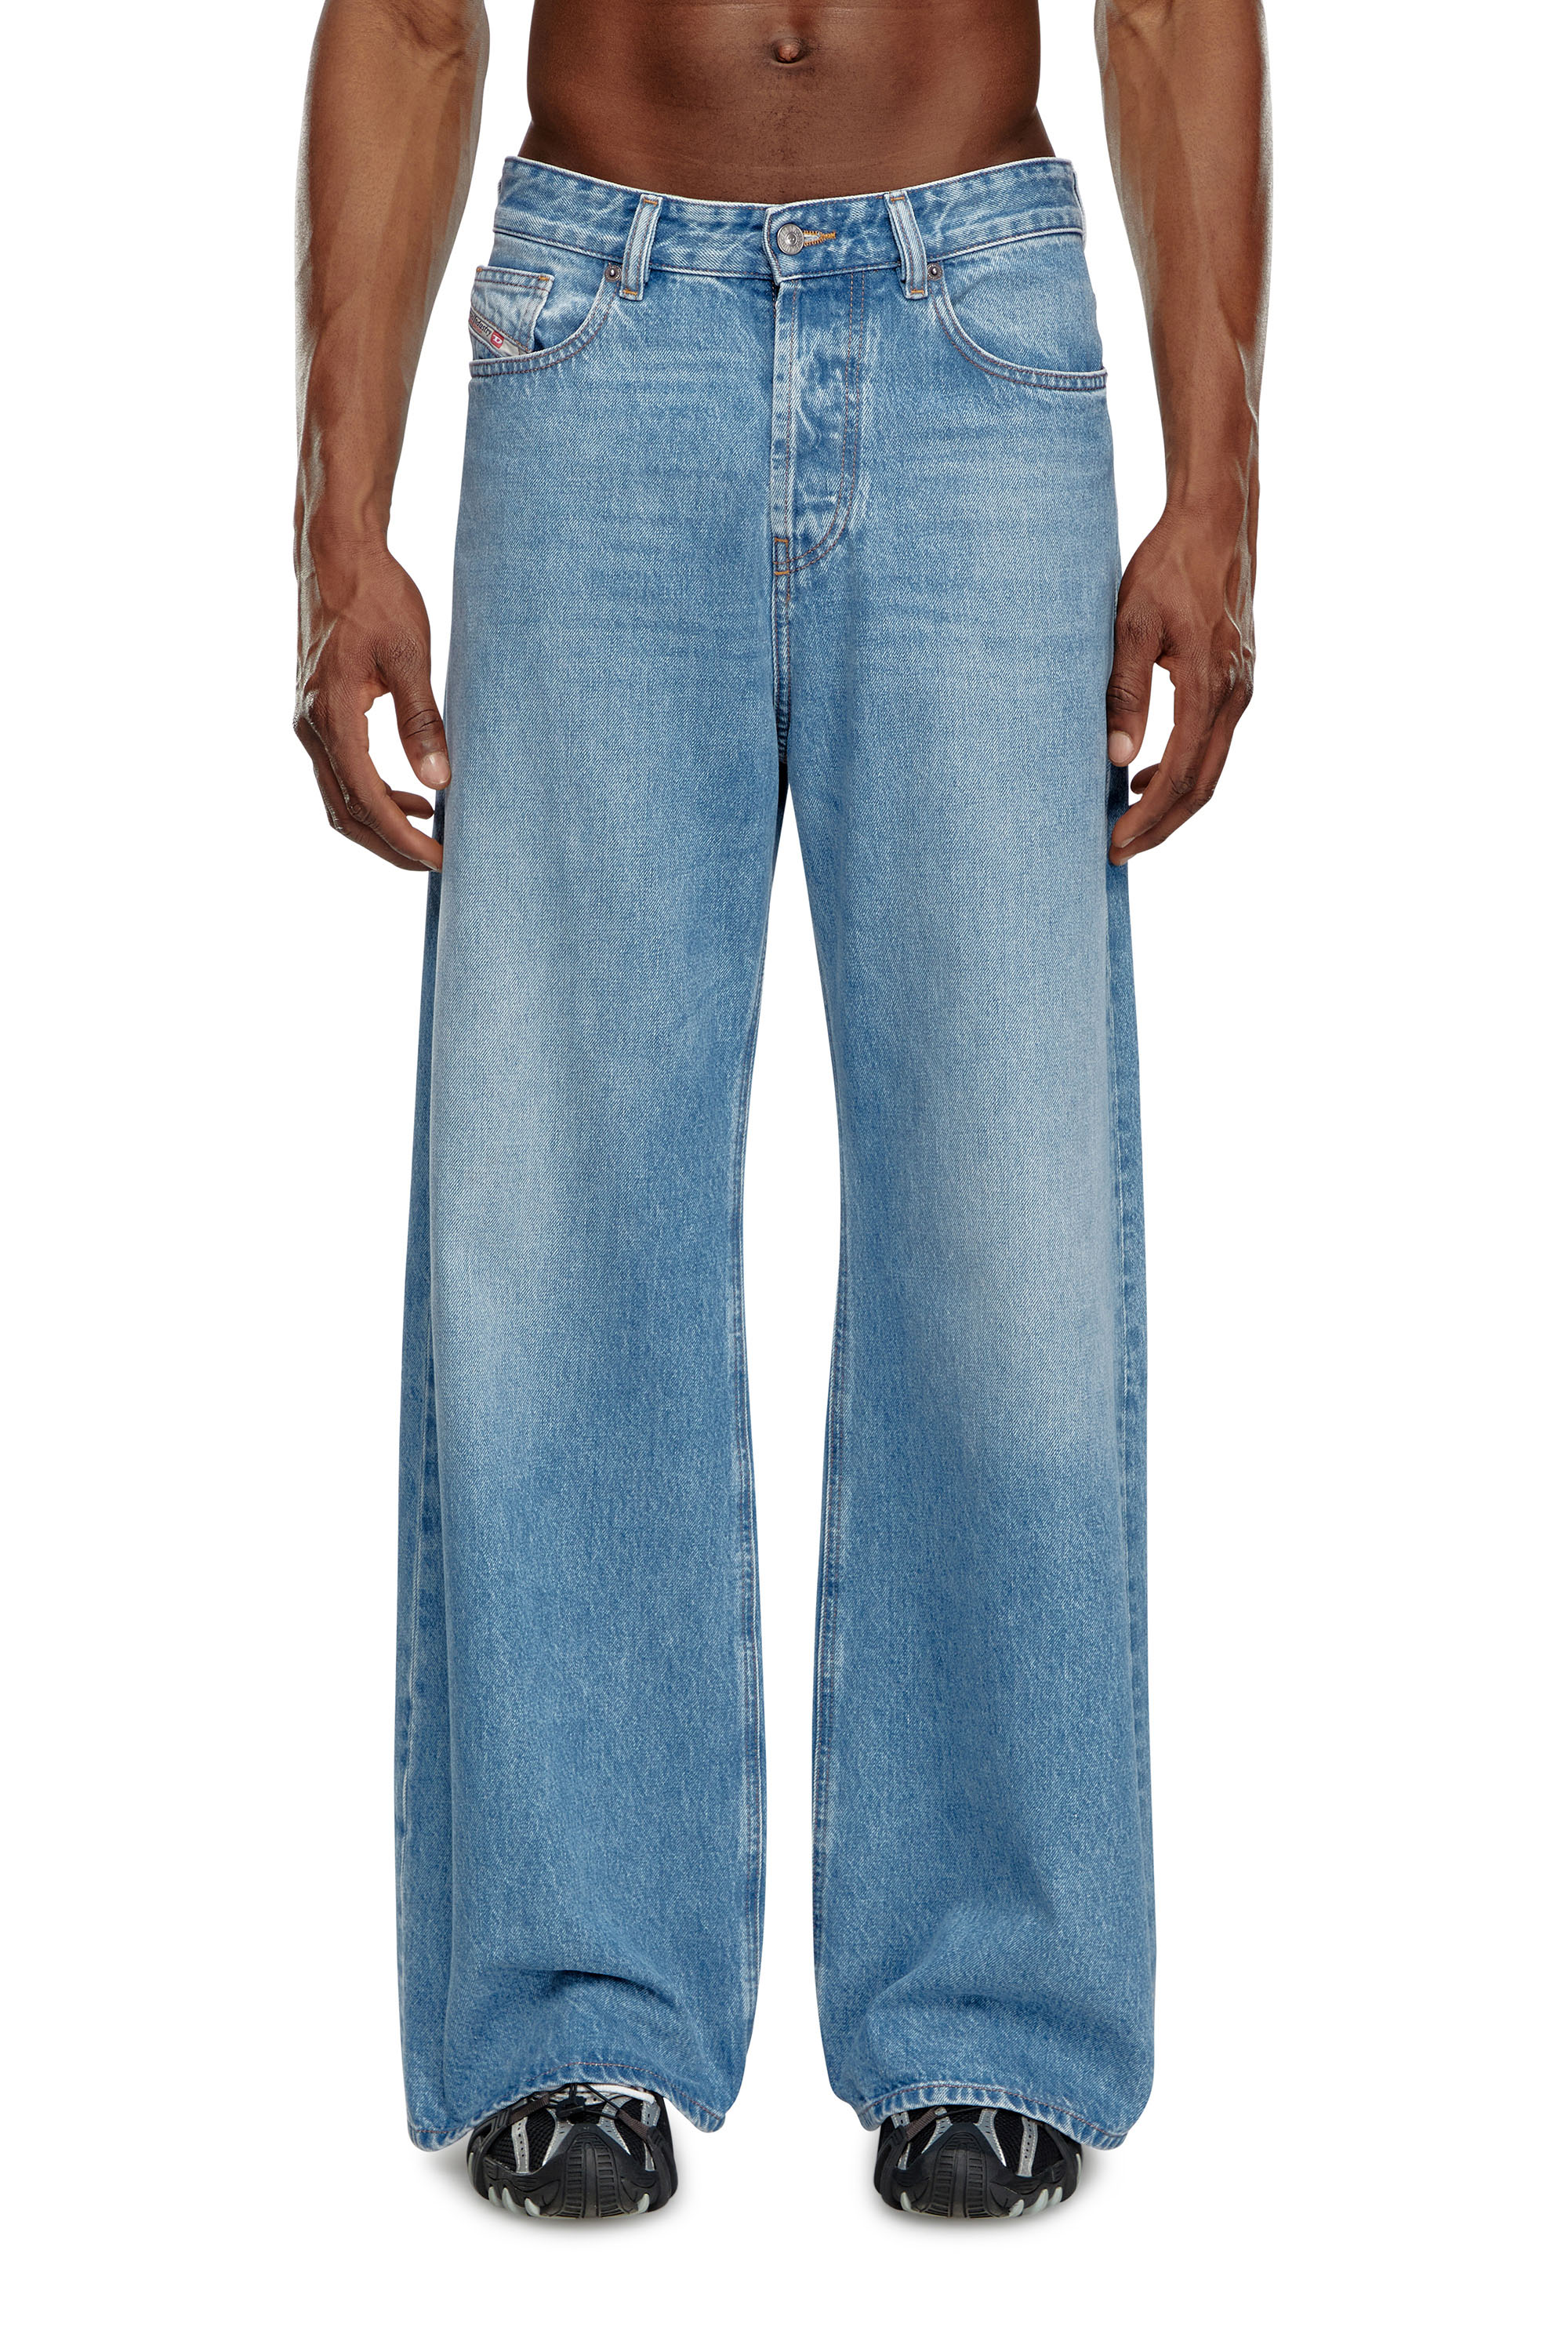 Diesel - Straight Jeans 1996 D-Sire 09I29, Mujer Straight Jeans - 1996 D-Sire in Azul marino - Image 1